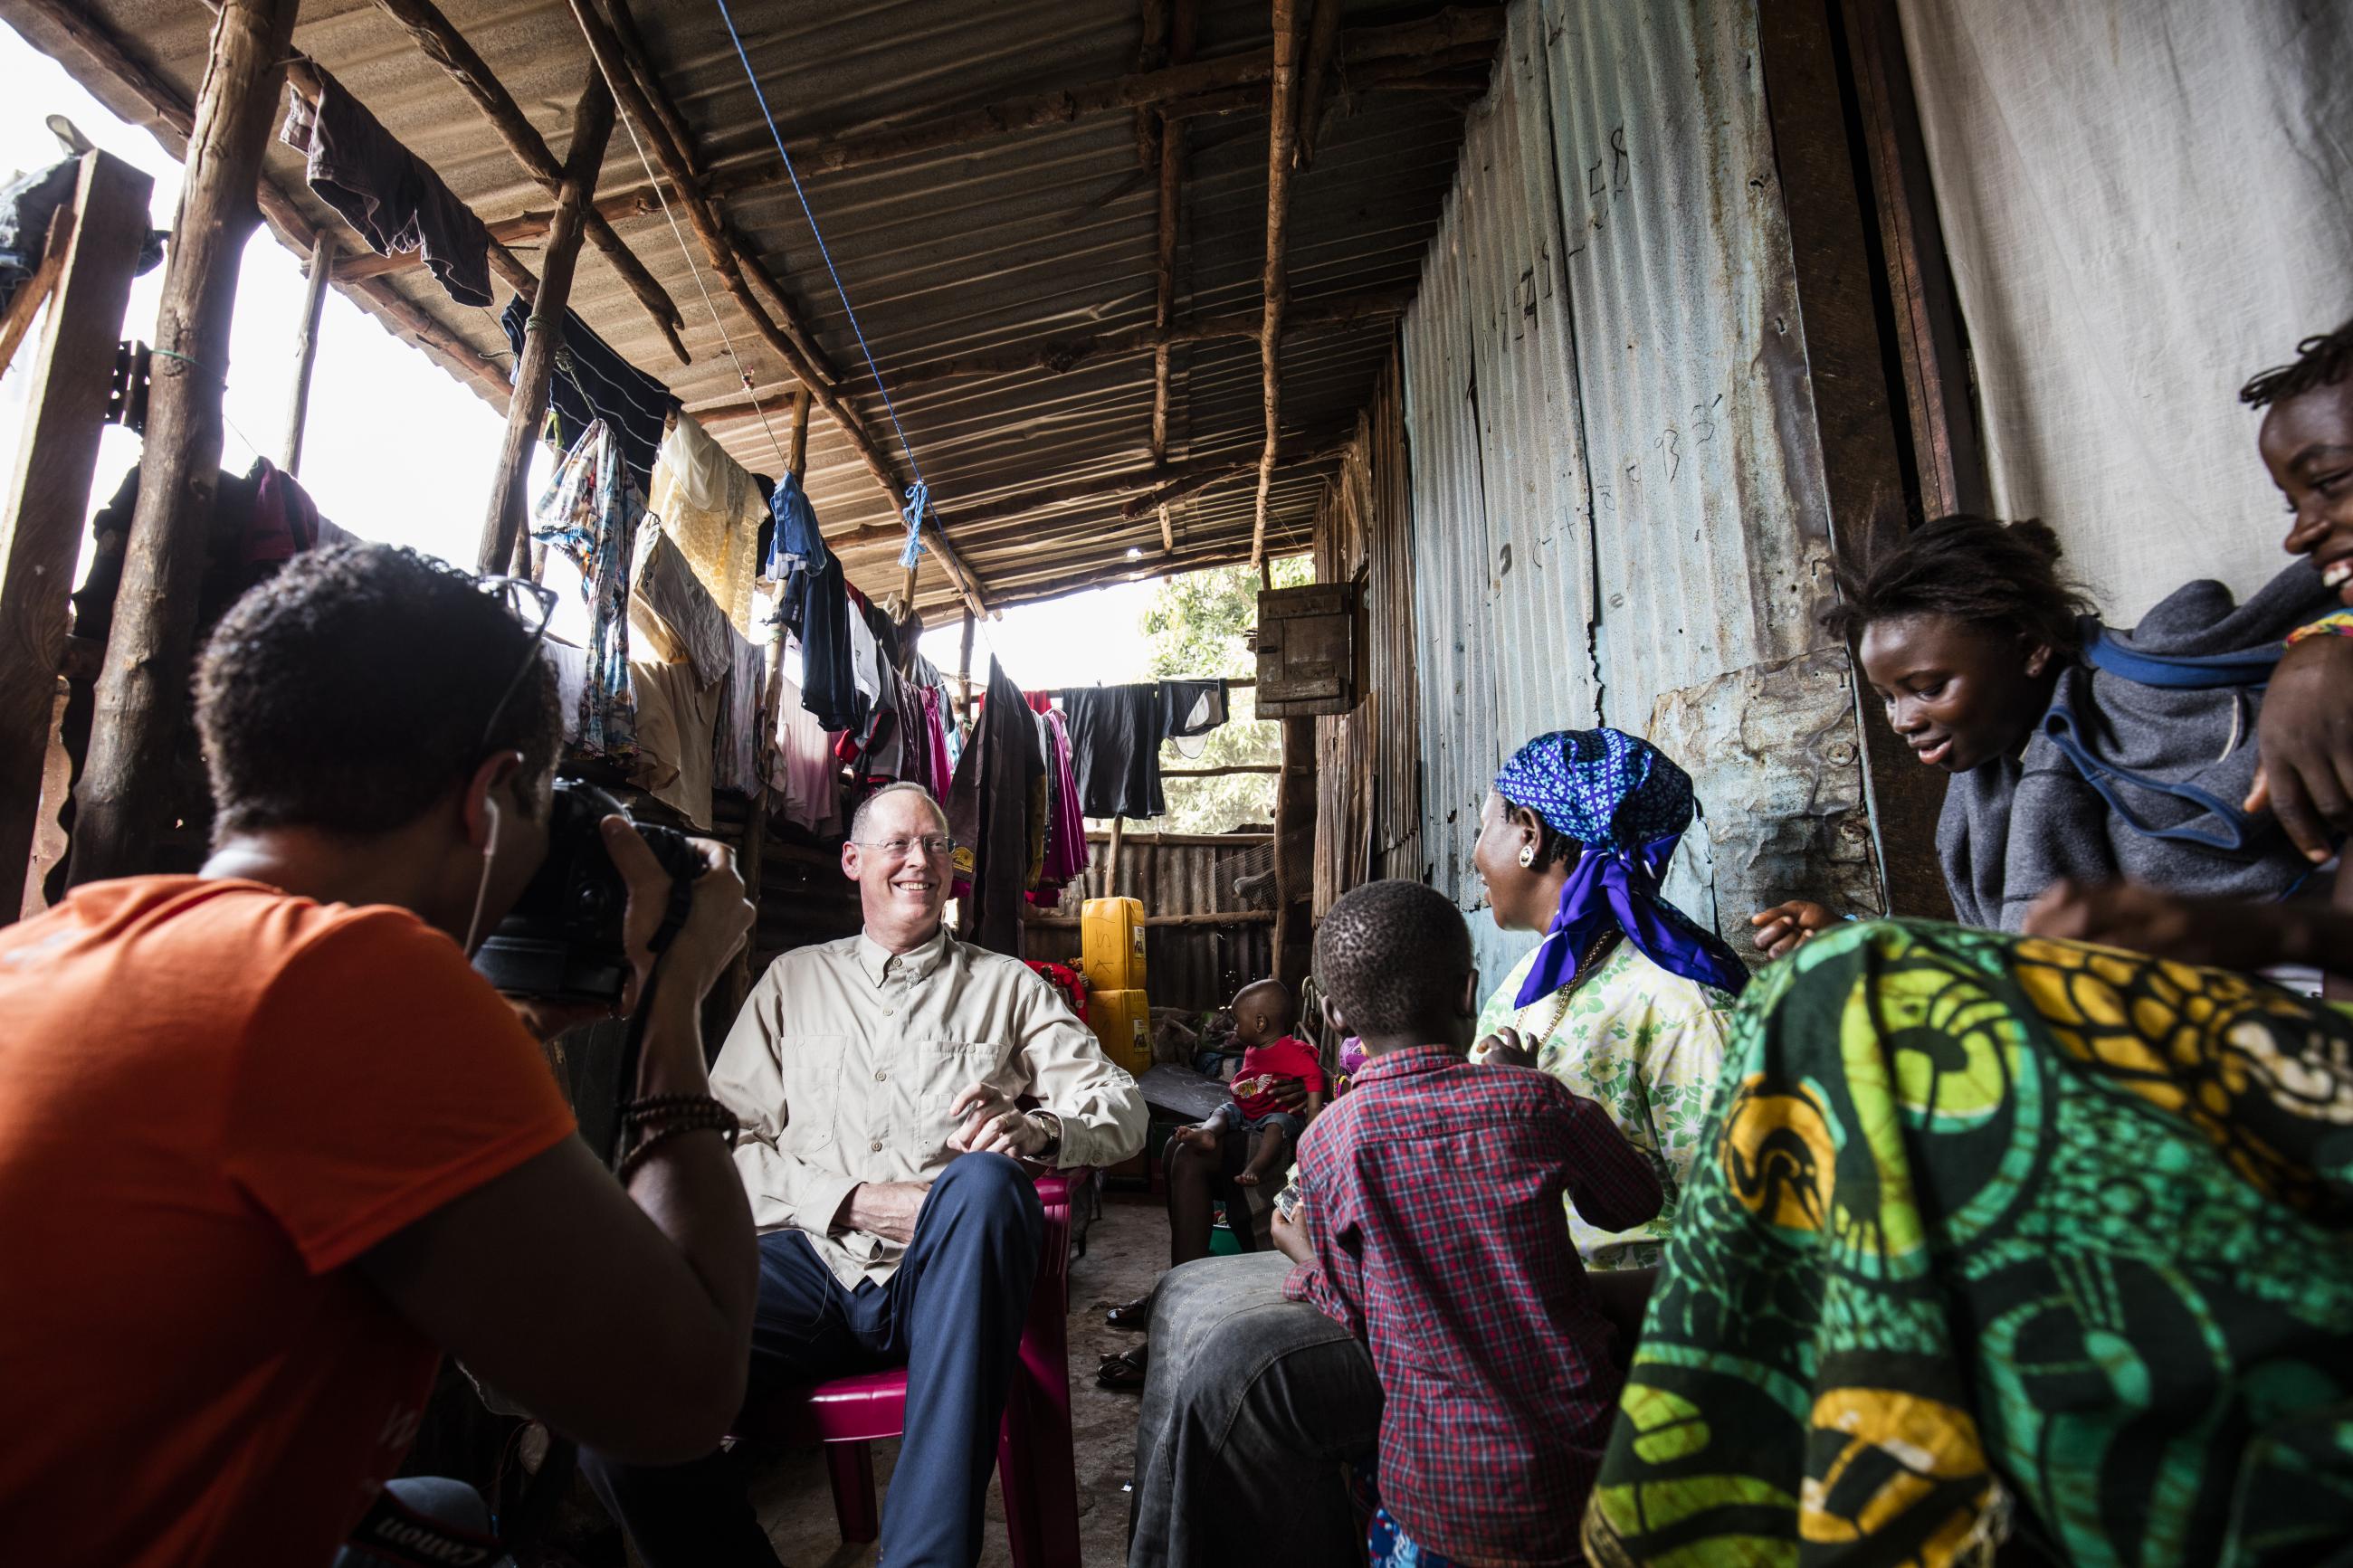 Paul Farmer visits Ebola survivor Yabom Koroma and her family at their home in the Mountain Court section of Freetown, Sierra Leone on December 14, 2015. Photo courtesy of PIH.